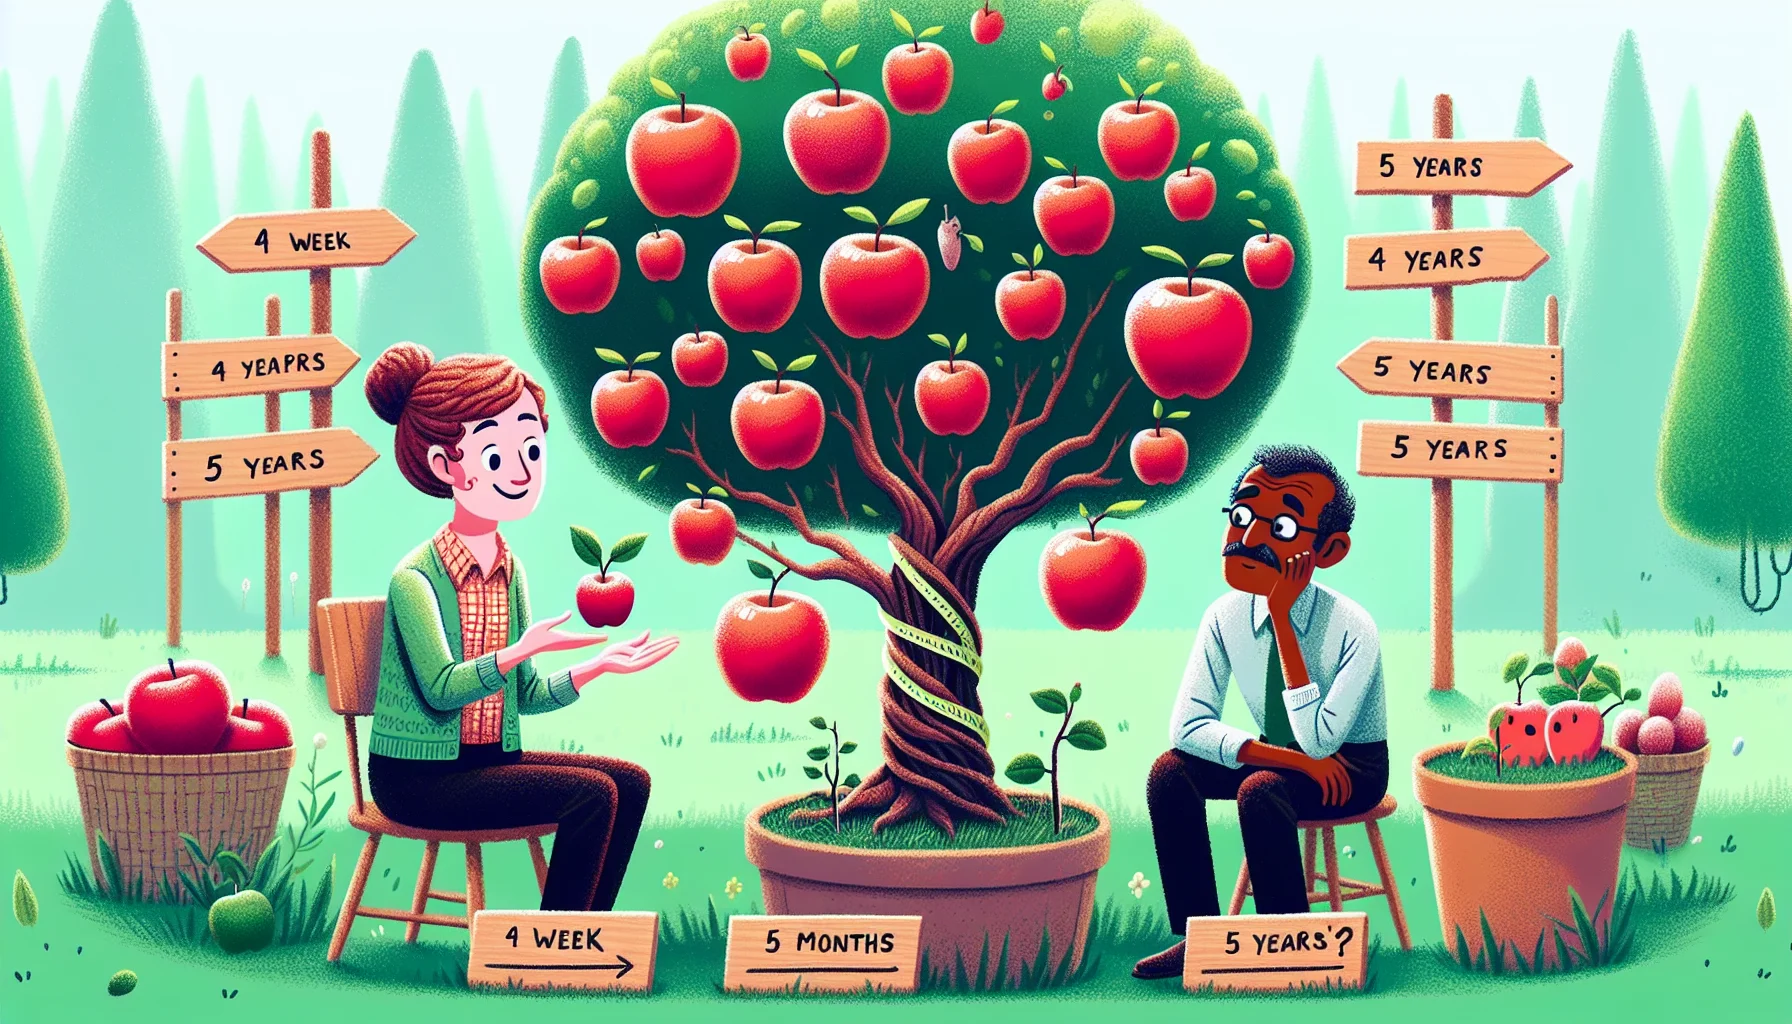 Imagine a whimsical scene in a garden. In the forefront, a Caucasian woman happily tends to the apple tree whose branches are laden with ample ripe red apples. A slightly befuddled South Asian man stares at his tiny apple sapling in a pot next to her with a single small fruit hanging. Behind them lies a series of wooden signs showing the growth stages of an apple tree from sapling to fruit-bearing tree, with each sign humorously exaggerating the time it takes like '1 week', '2 months', '5 years'? It's a whimsical reminder for people to appreciate the rewarding, albeit lengthy, process of growing an apple tree.